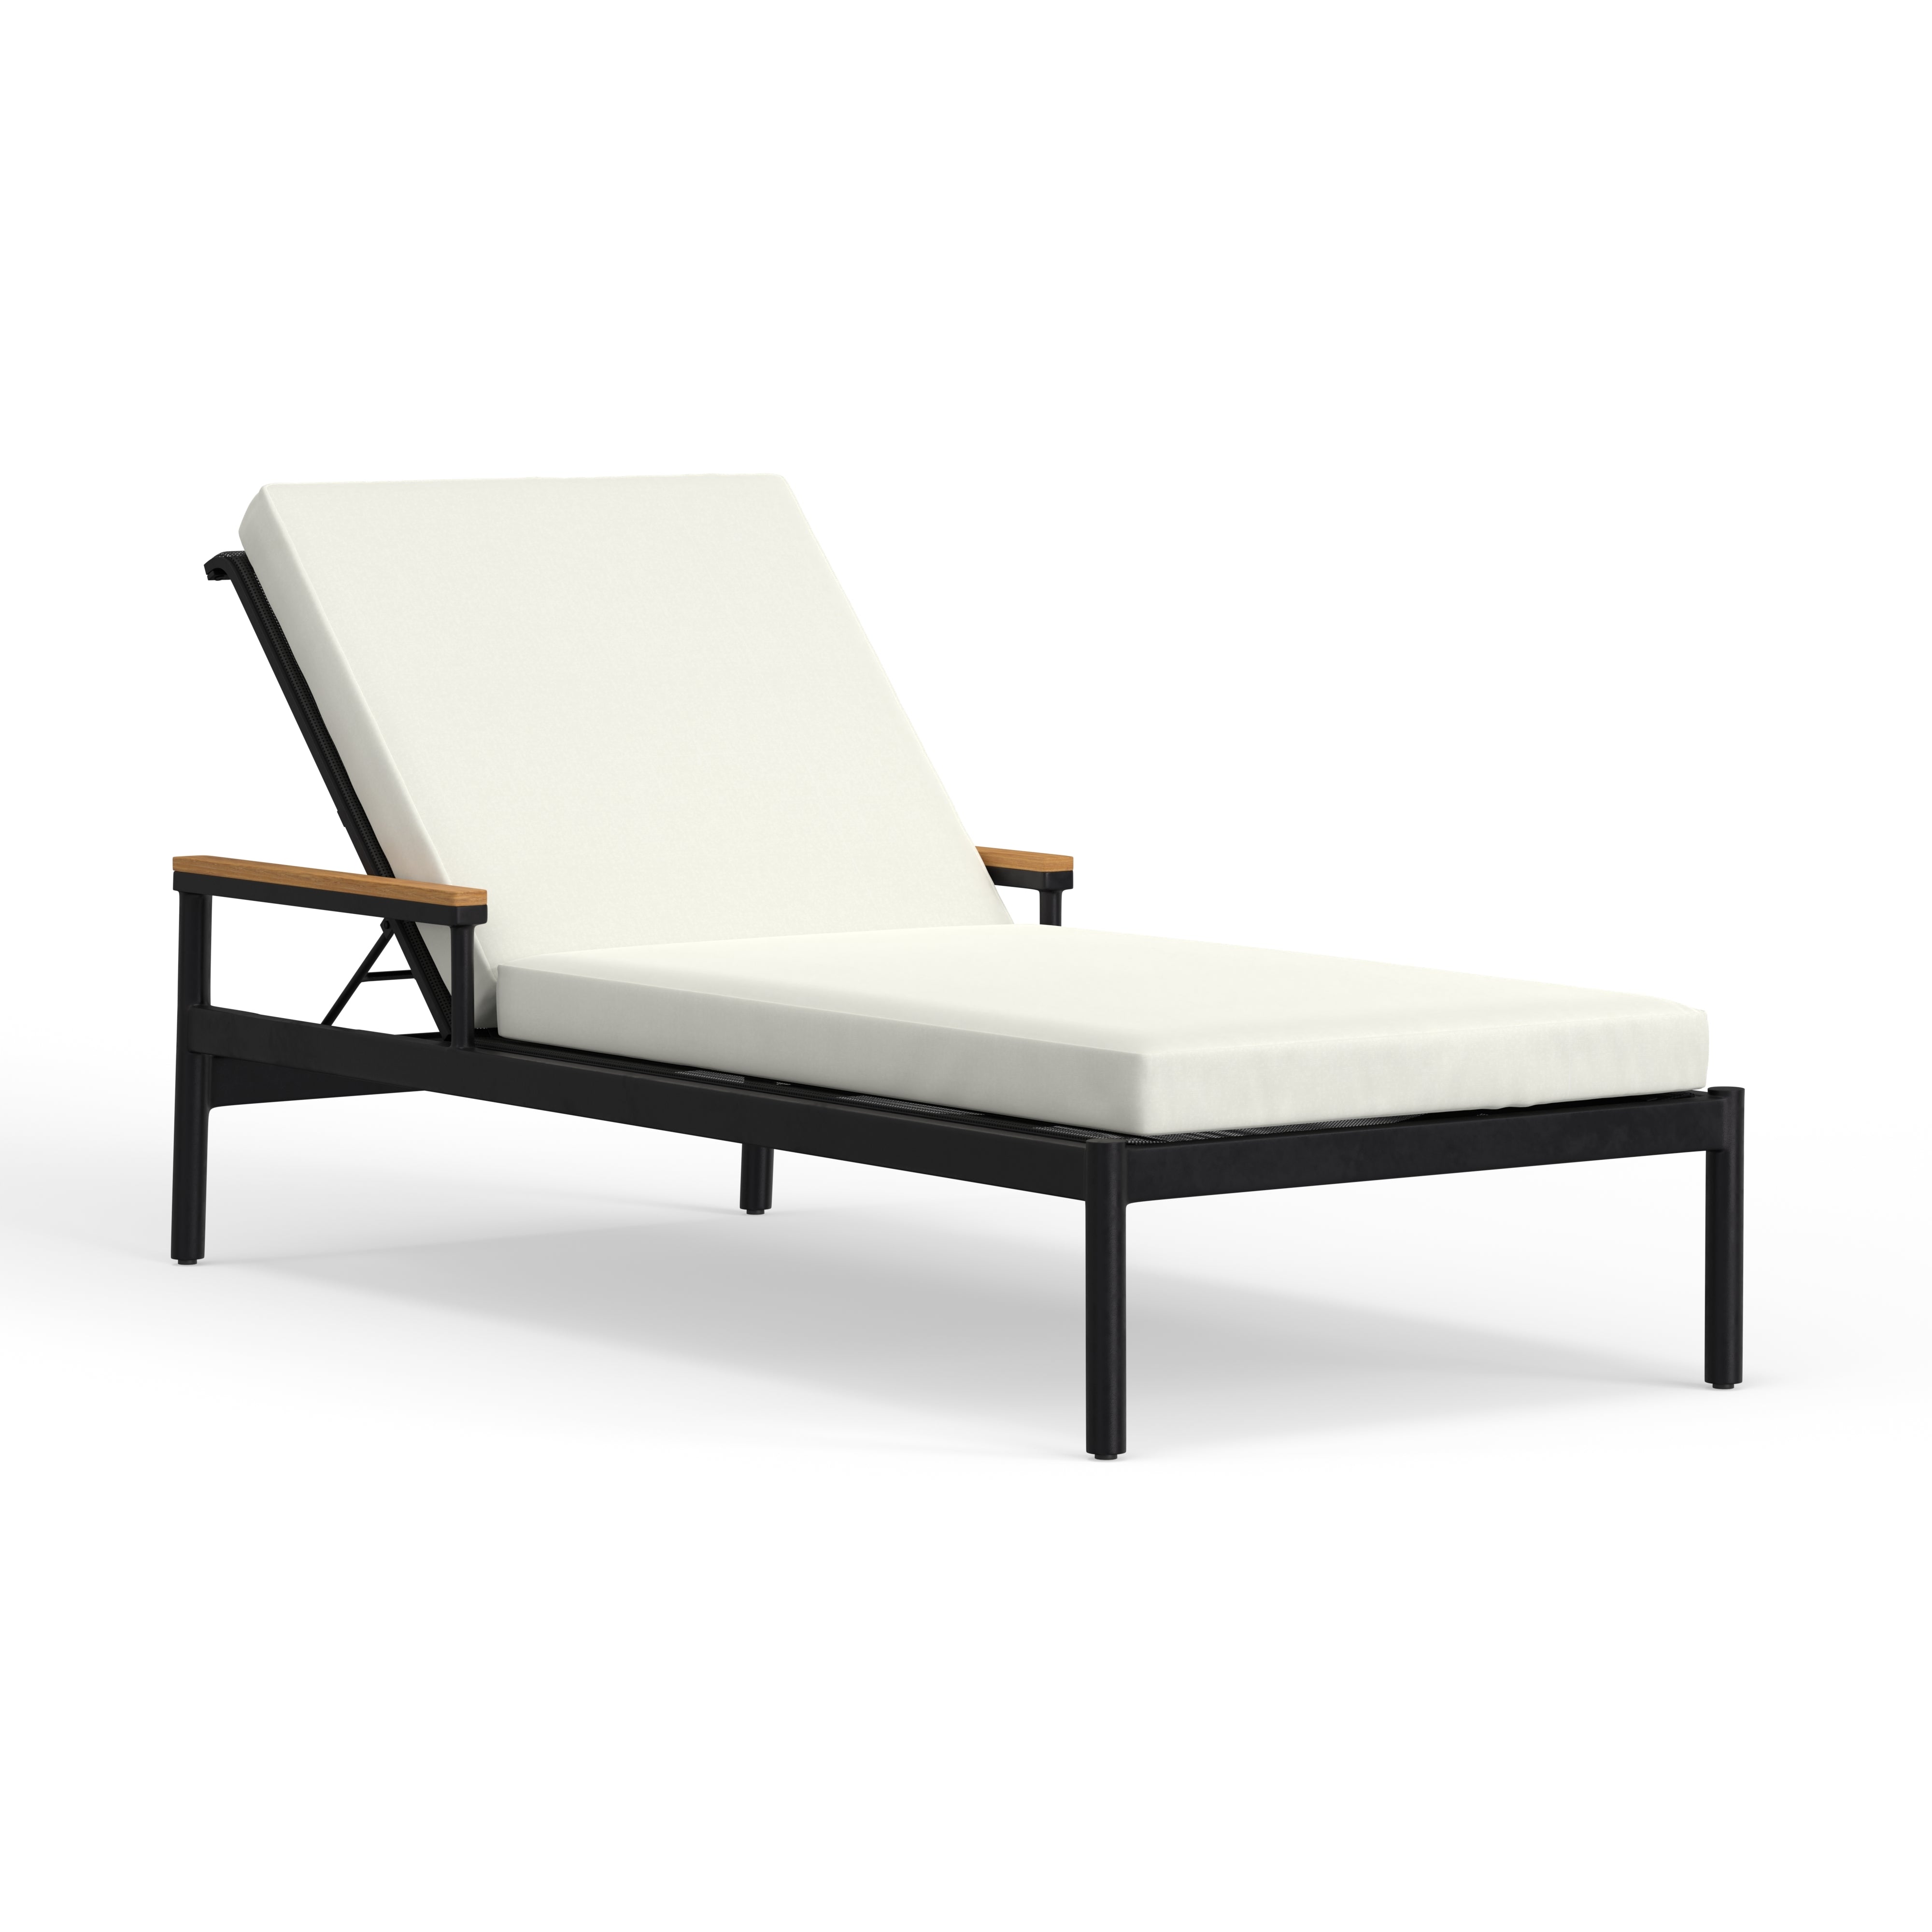 Best Quality Aluminum Chaise Lounge